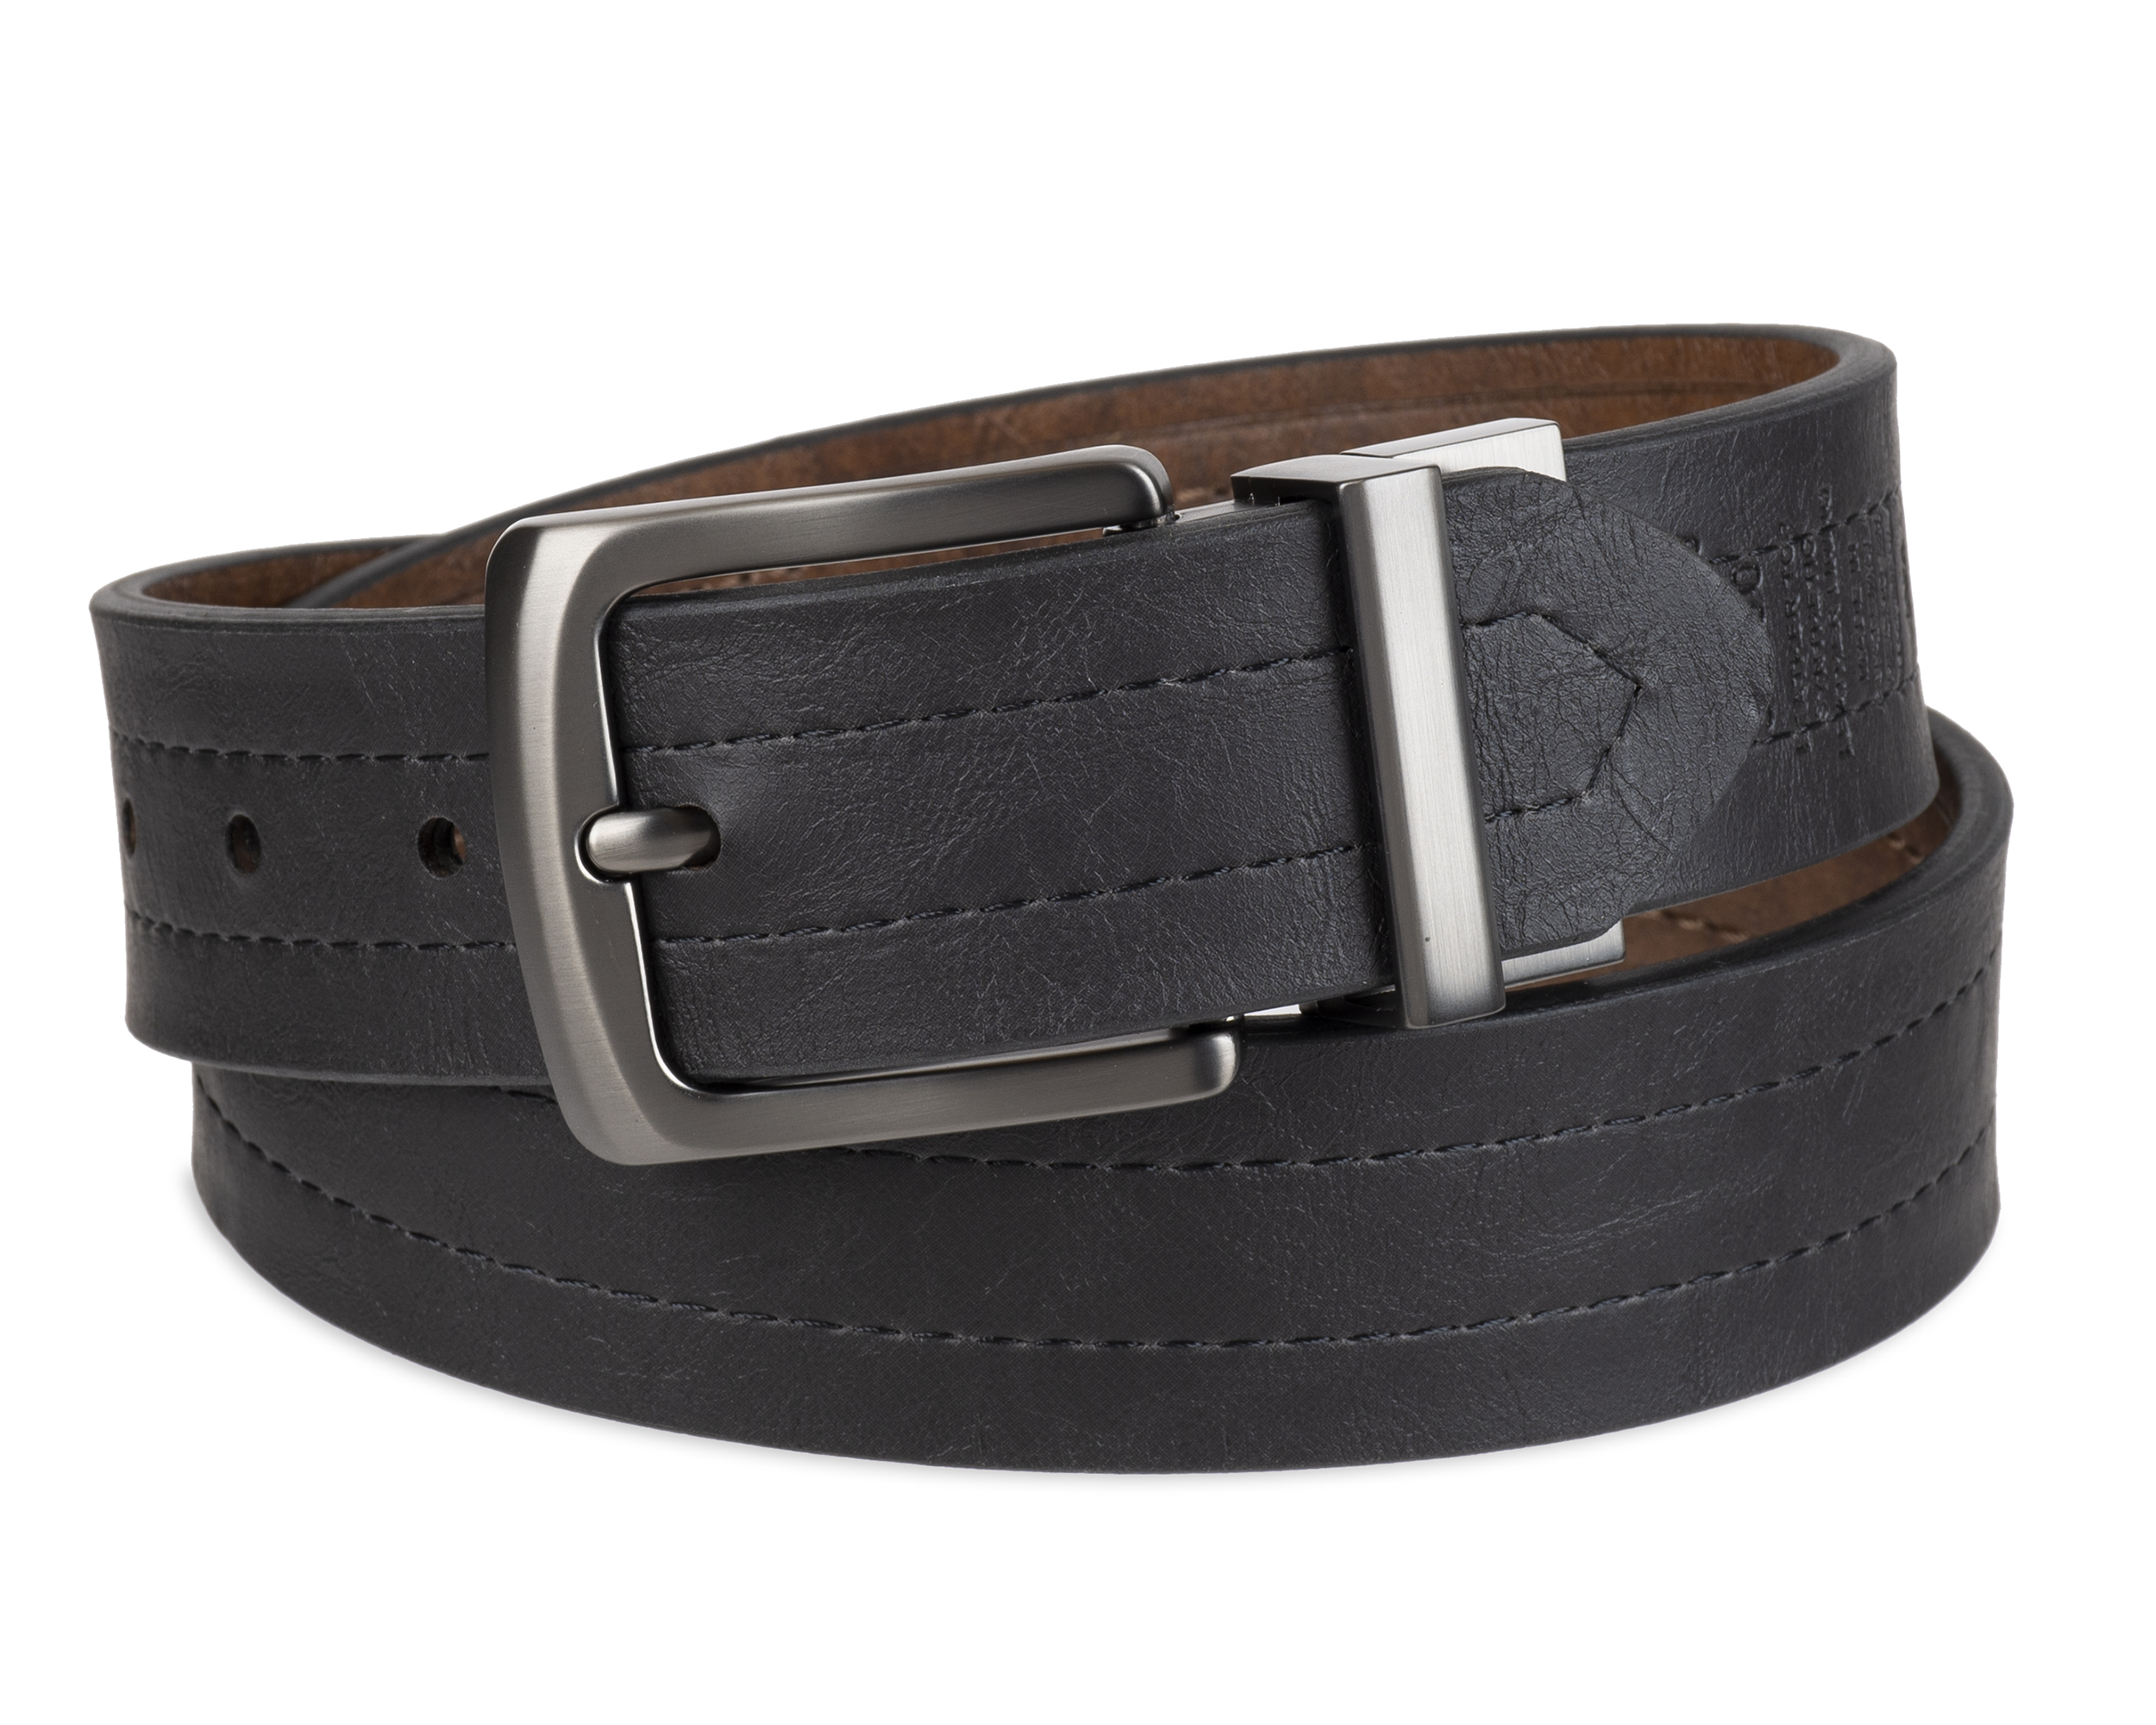 Levi's Men's Two-in-One Reversible Casual Belt, Brown/Black - image 2 of 8